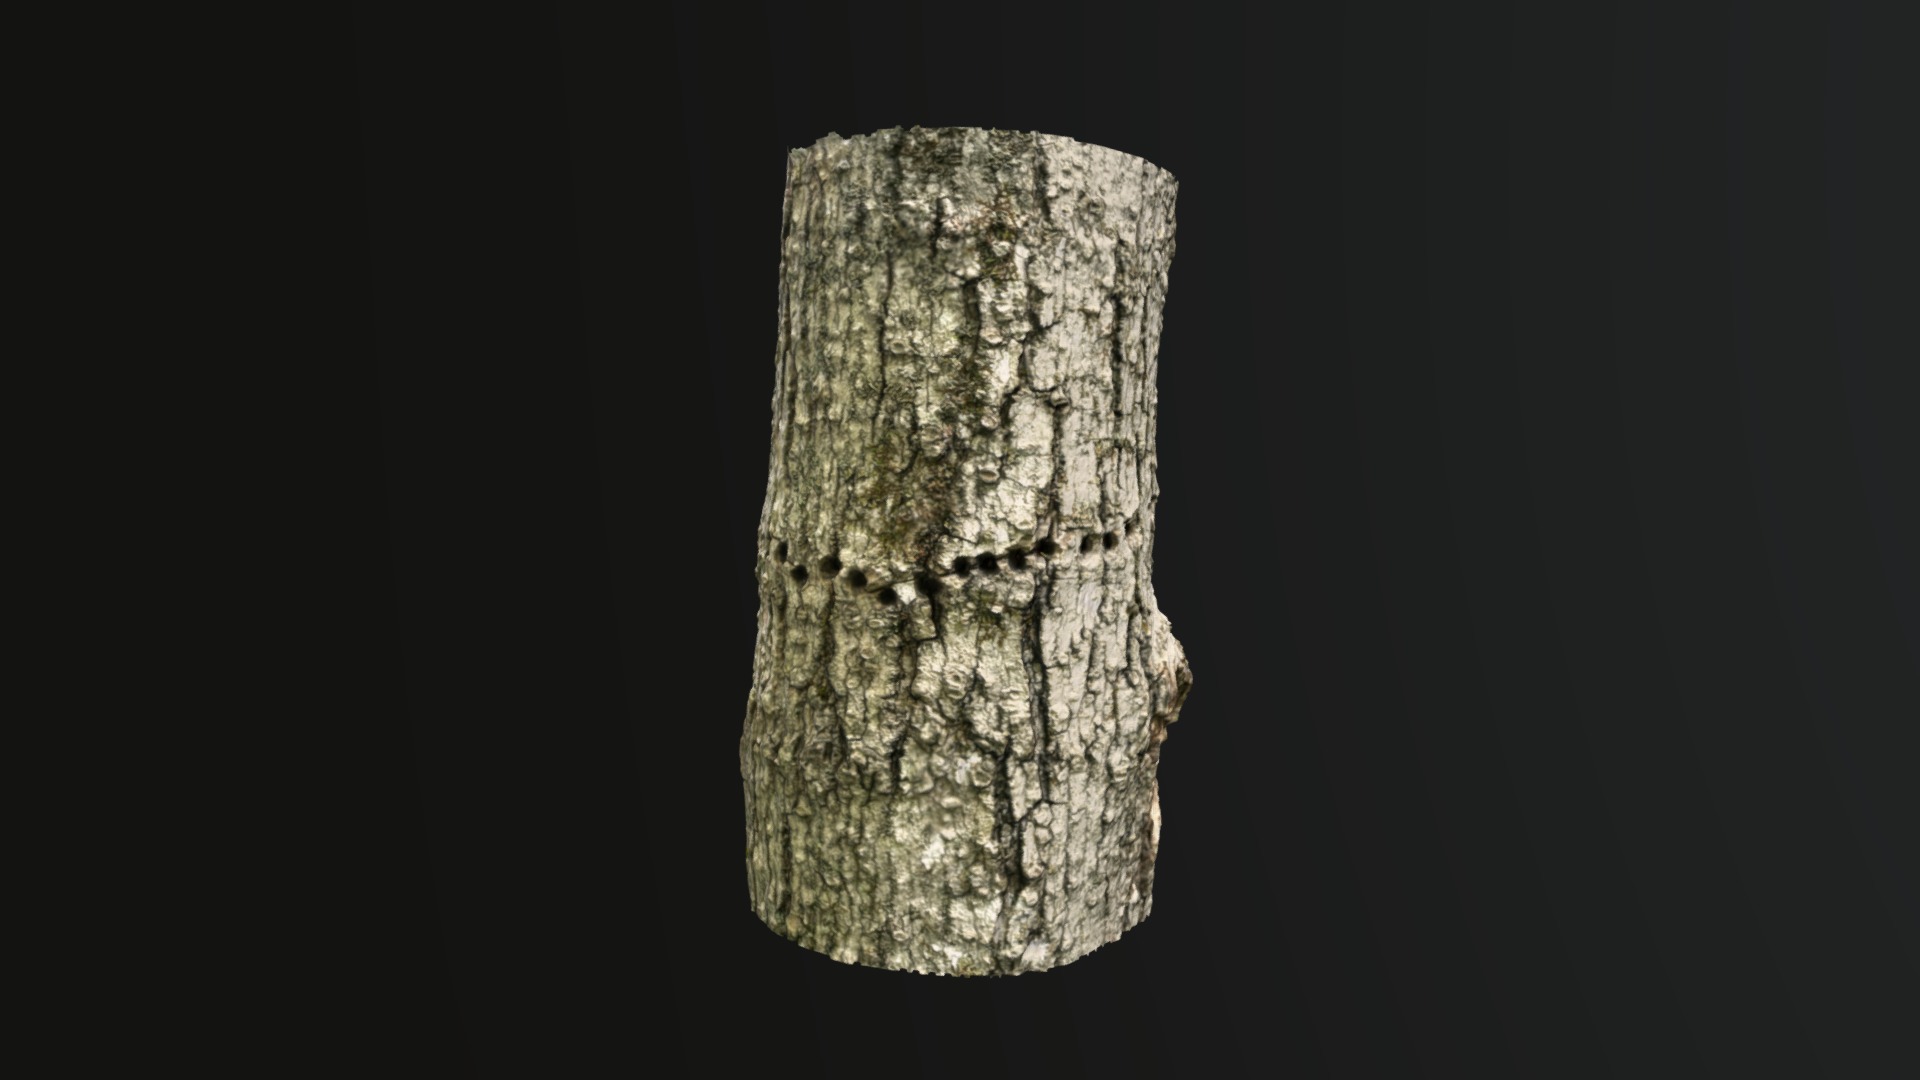 3D model Tree with Woodpecker holes - This is a 3D model of the Tree with Woodpecker holes. The 3D model is about a rock with a dark background.